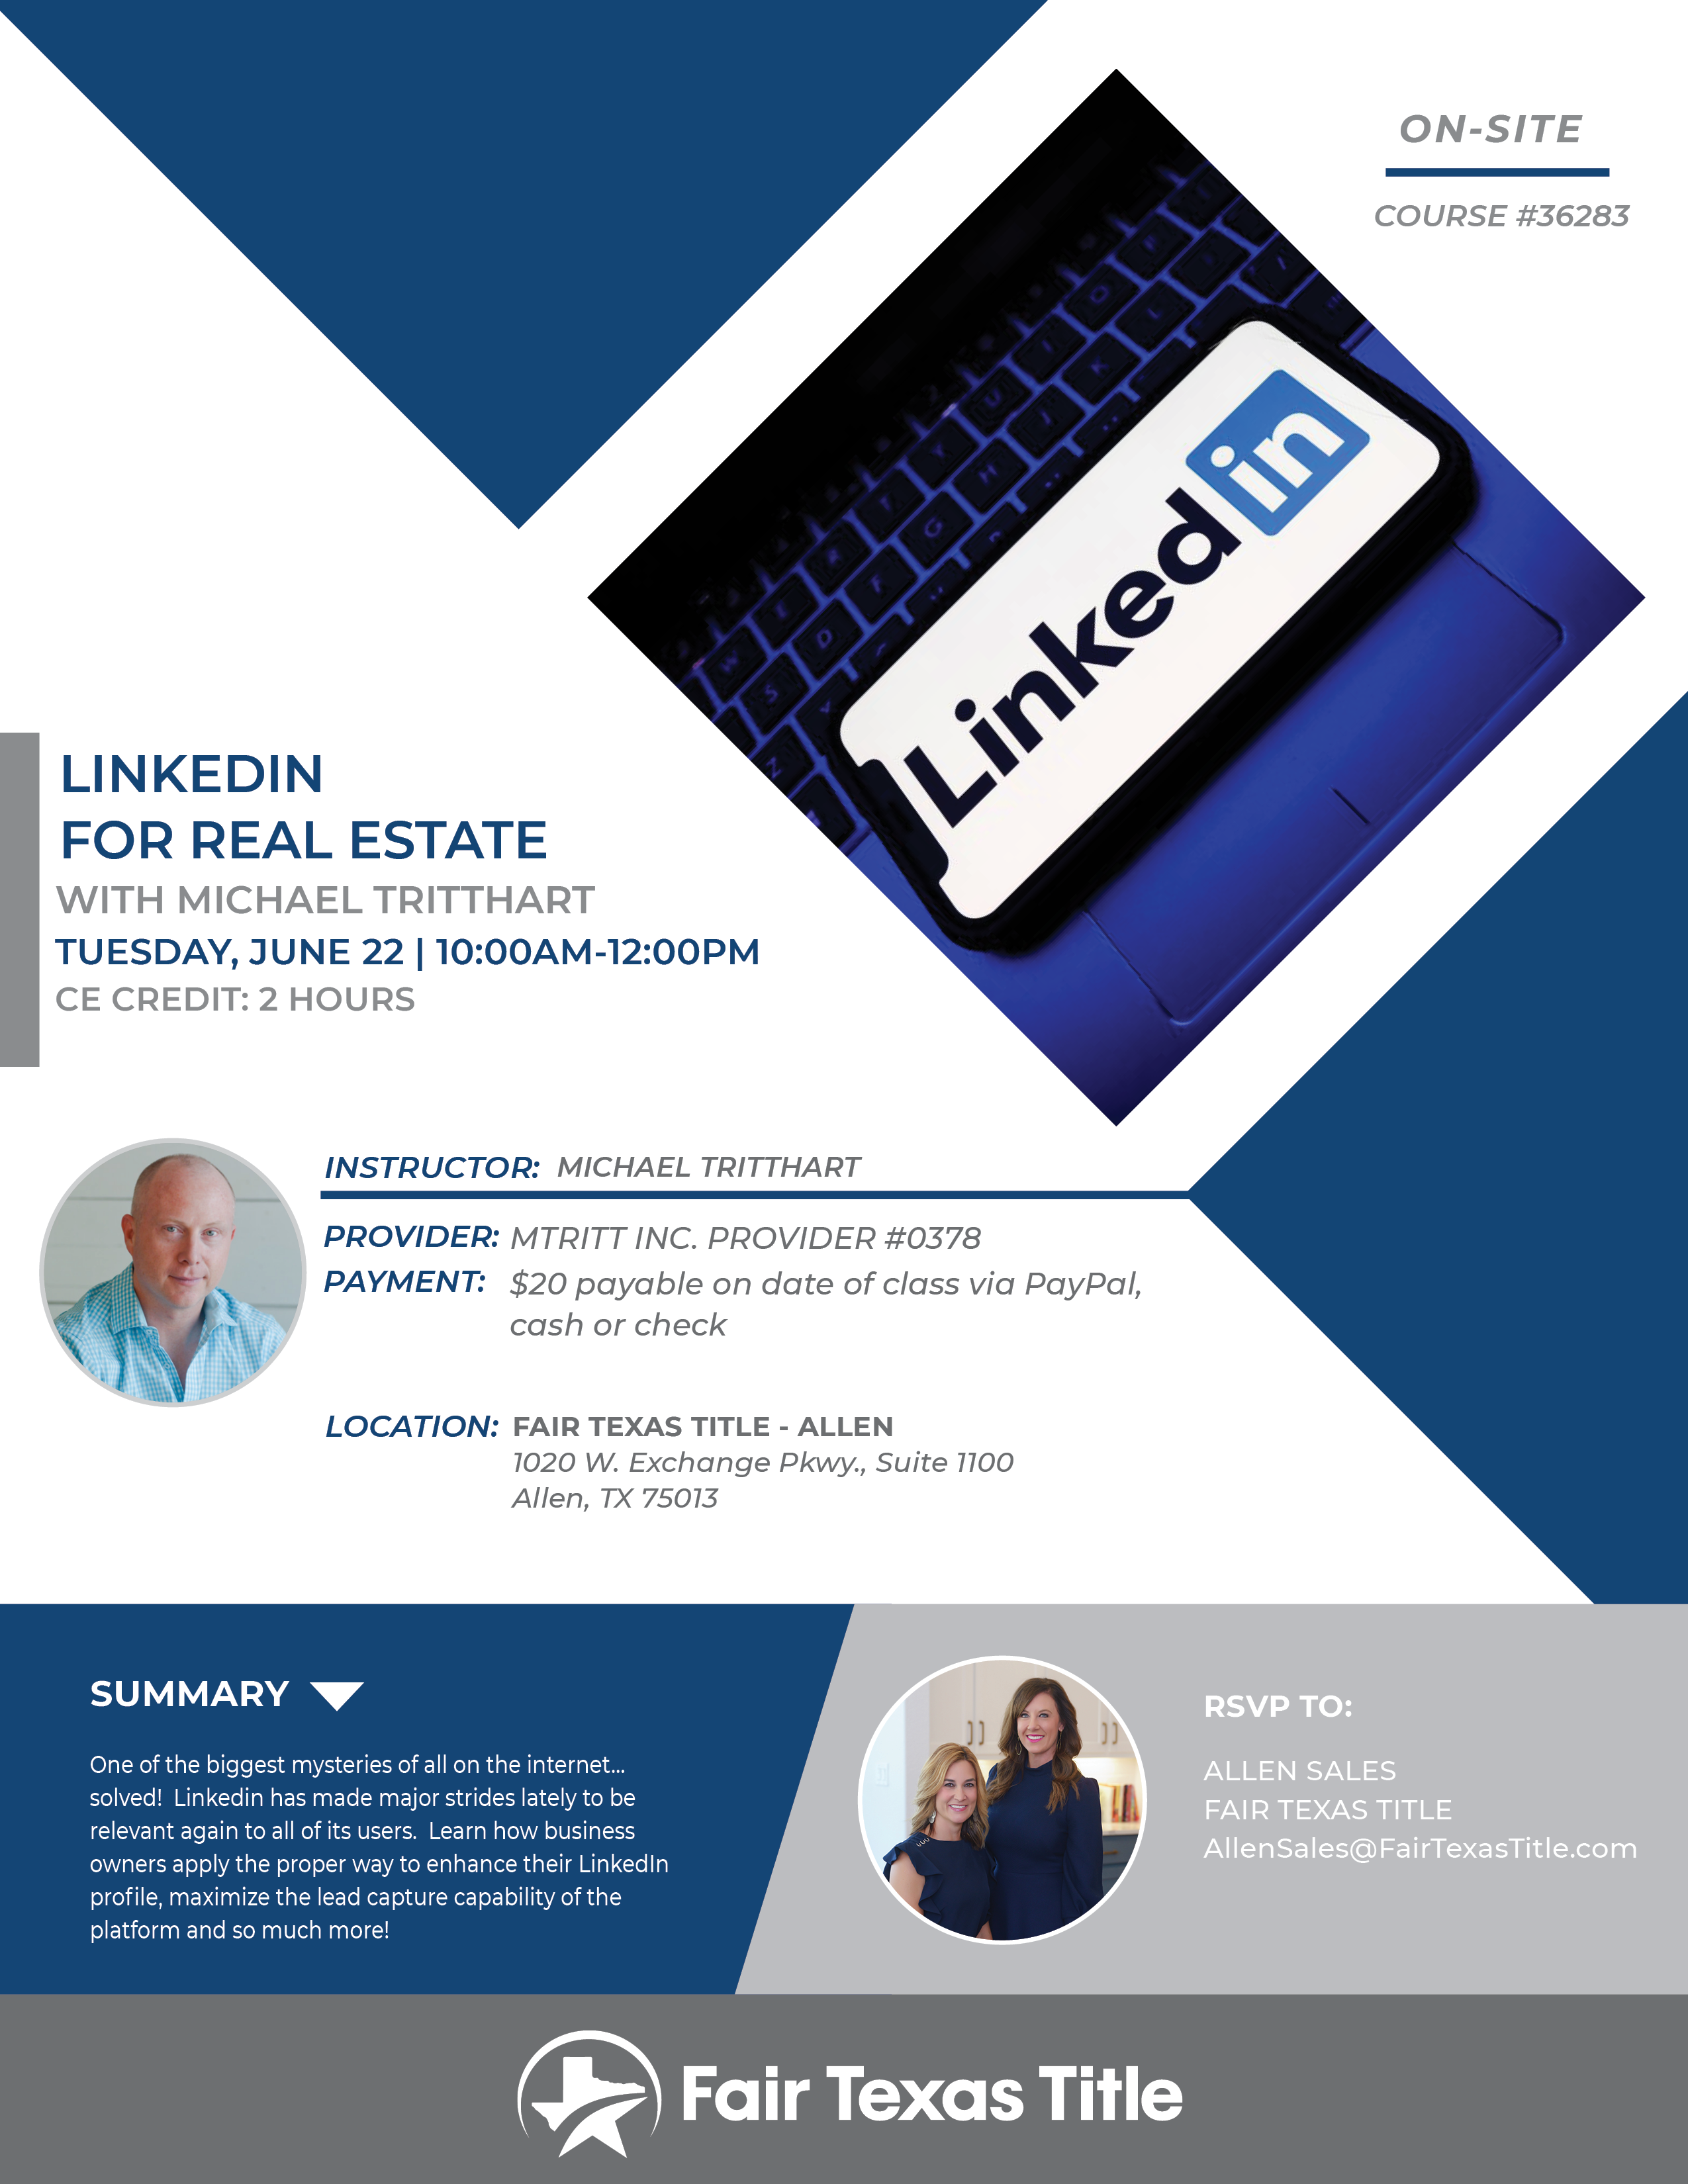 How to Use LinkedIn for Real Estate